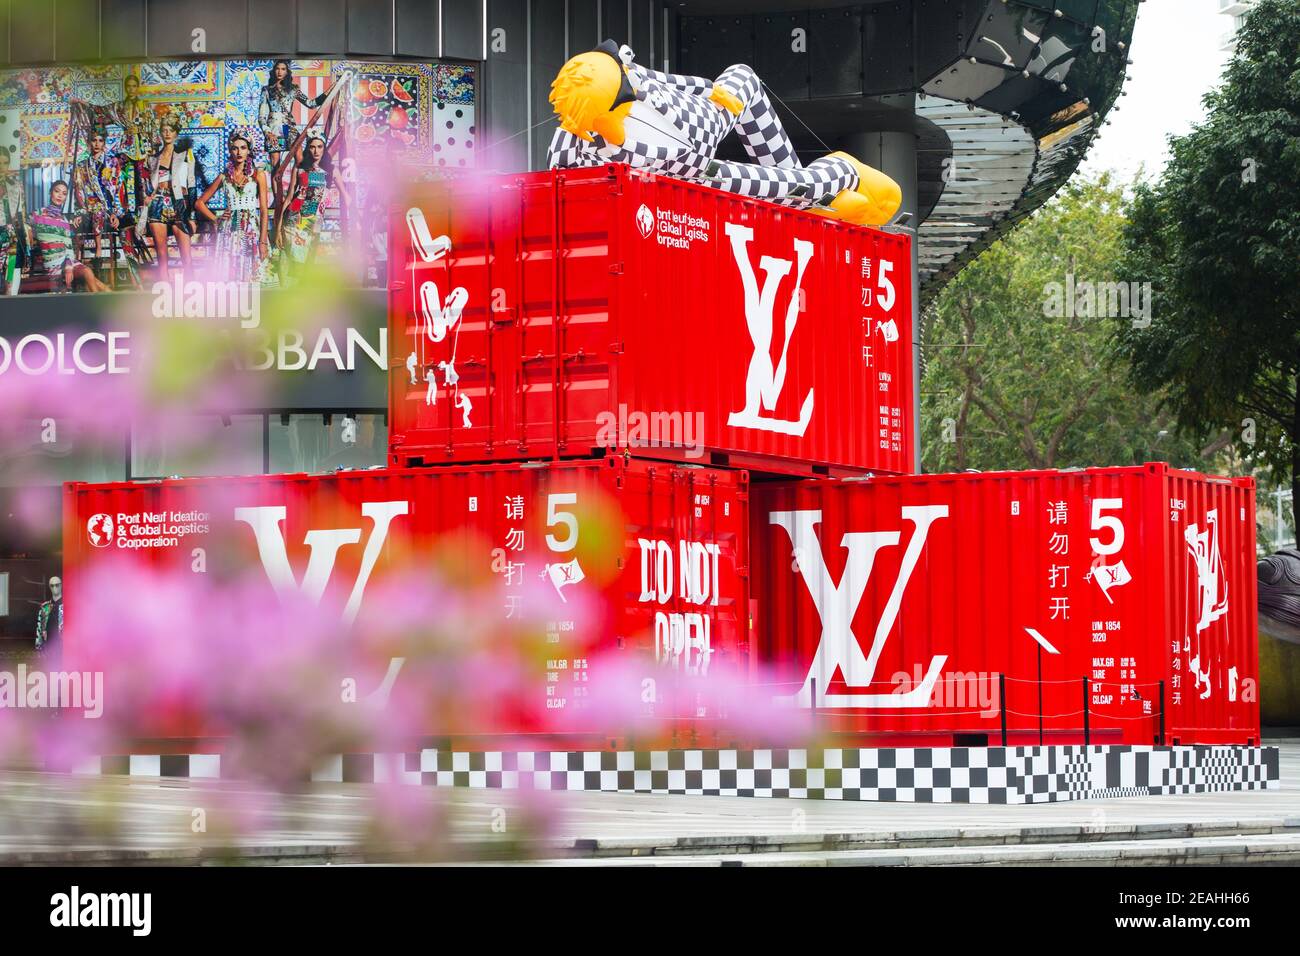 Louis Vuitton Fashion Tour Container in Singapore — Photographer based in  Singapore. Specialise in industrial and architecture interior